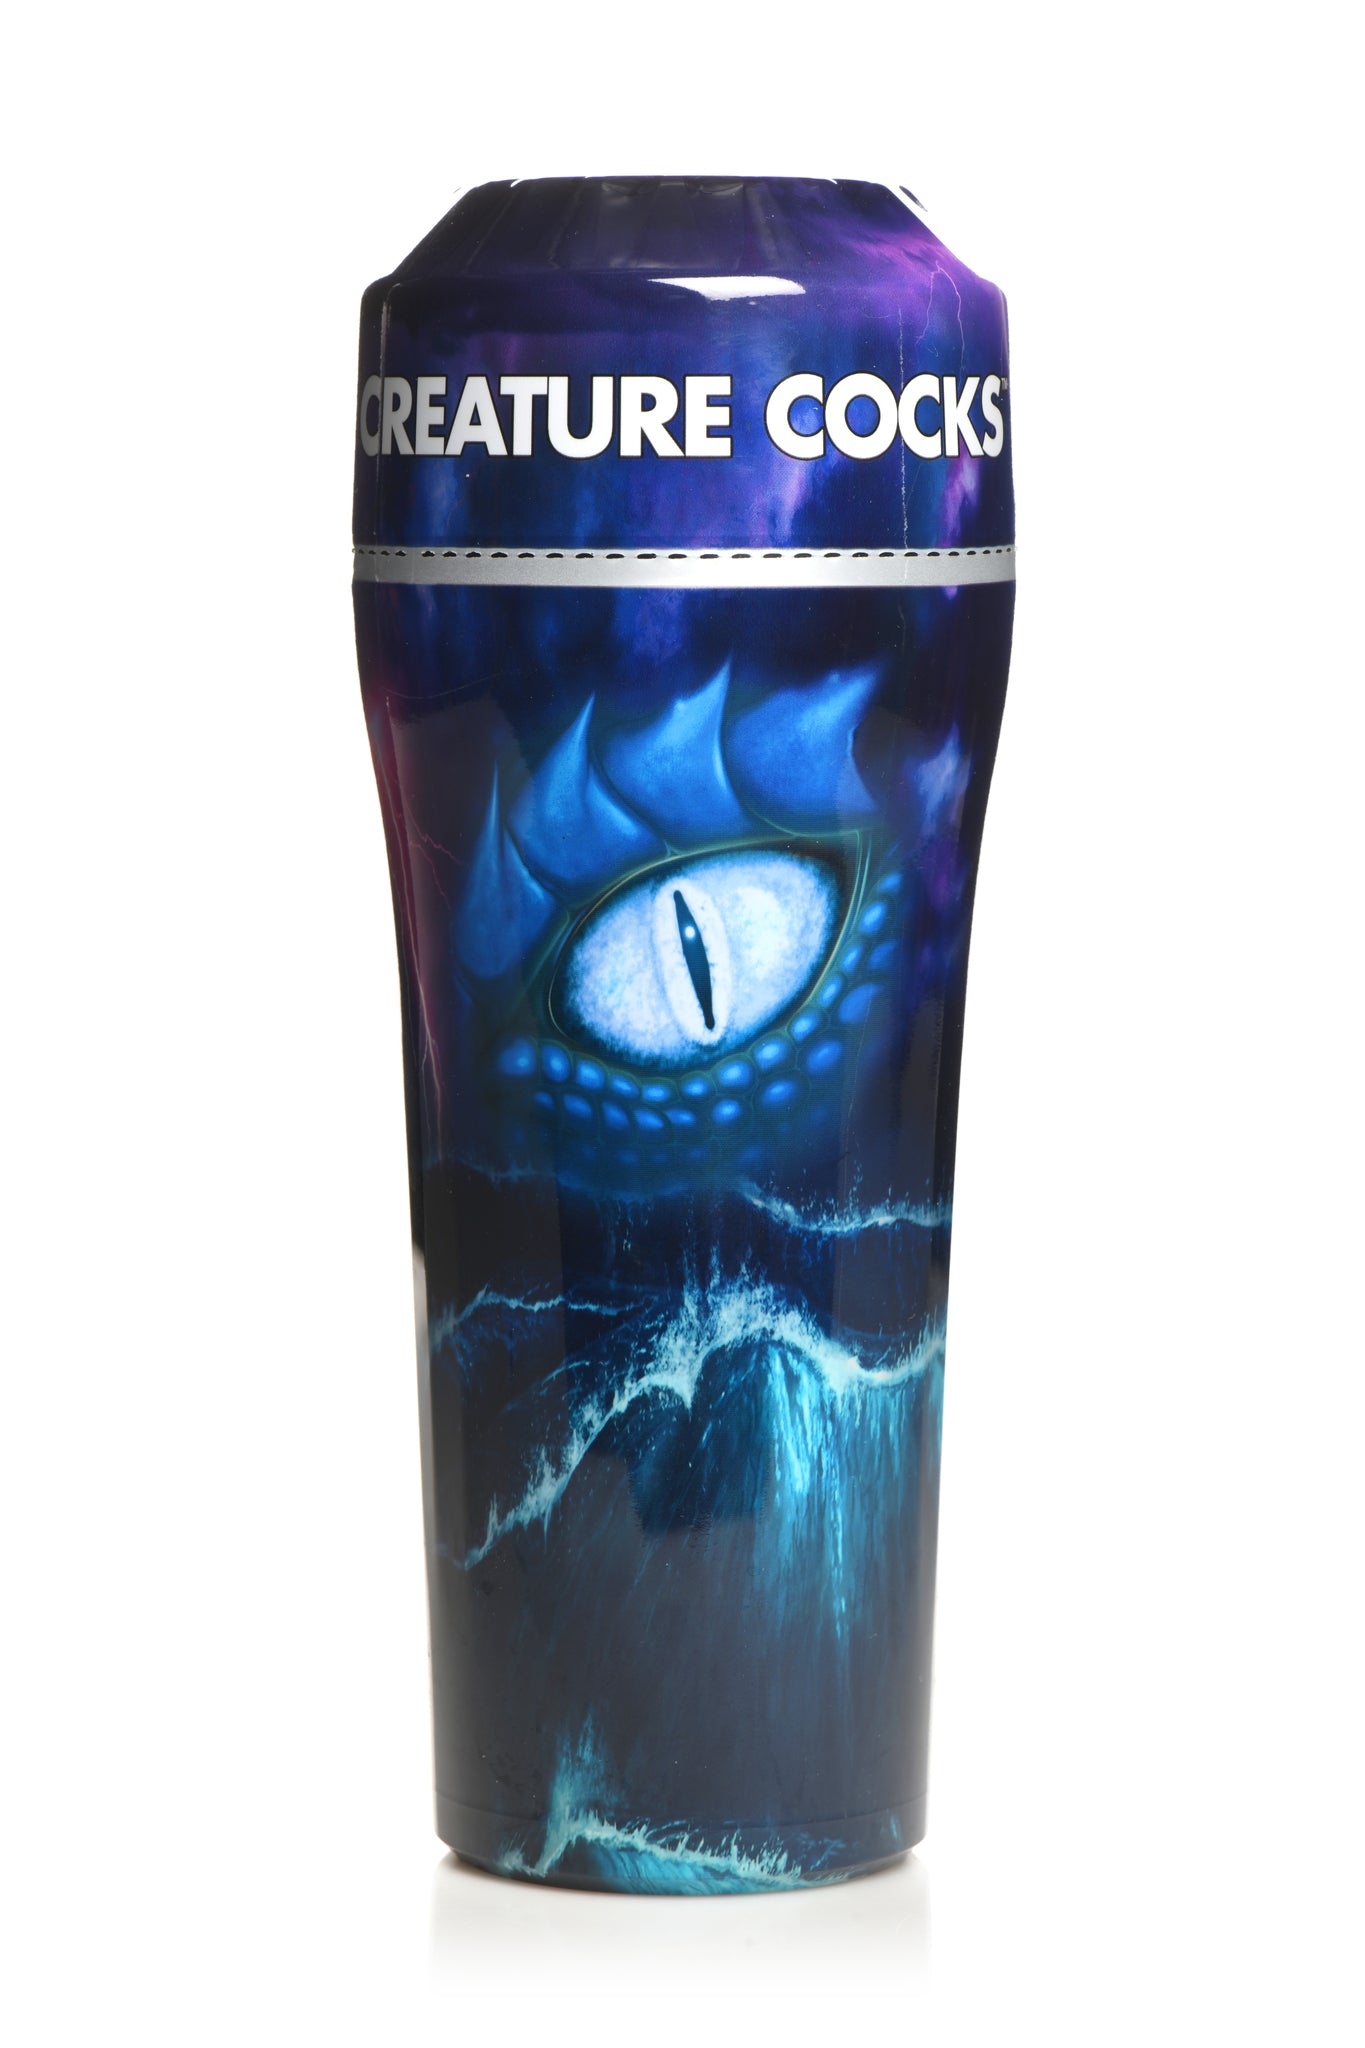 PUSSIDON SEA MONSTER STROKER by Creature Cocks